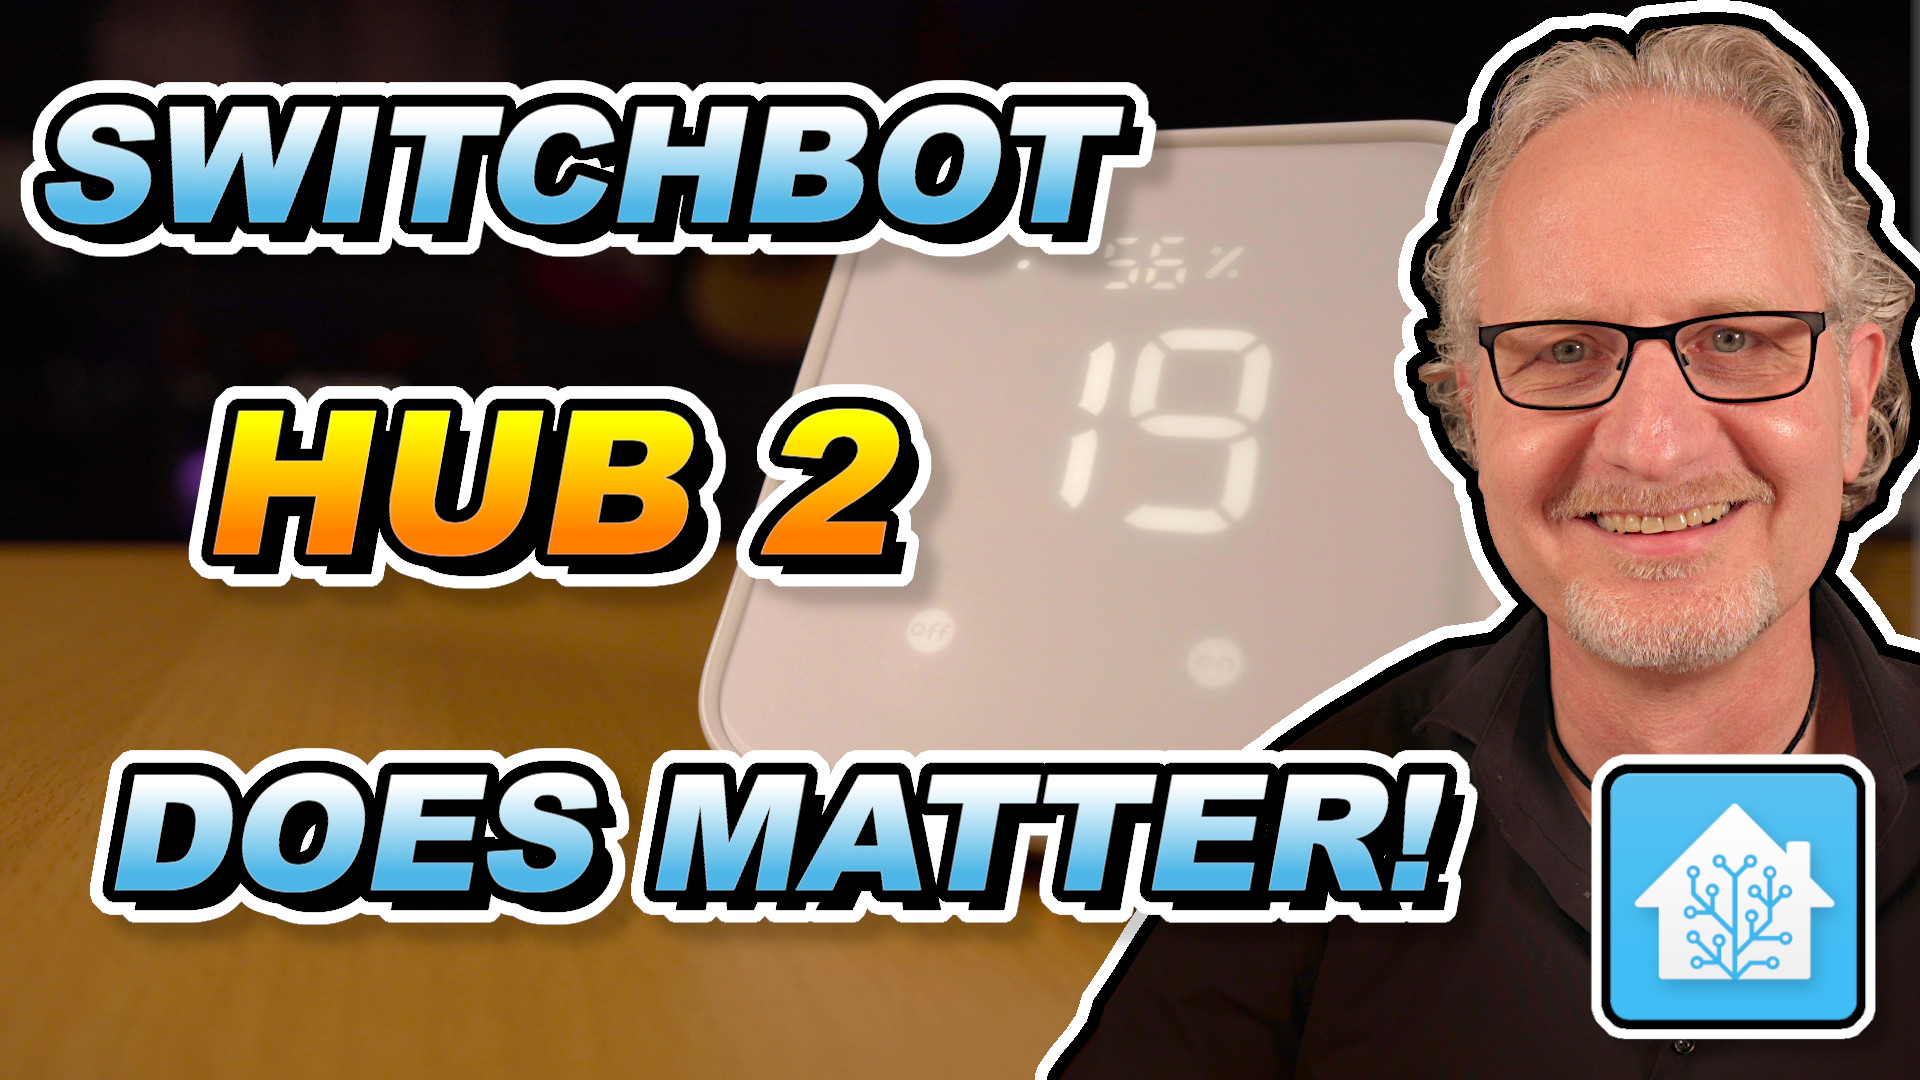 The SwitchBot Hub 2 can now connect to Home Assistant & Homekit using Matter!